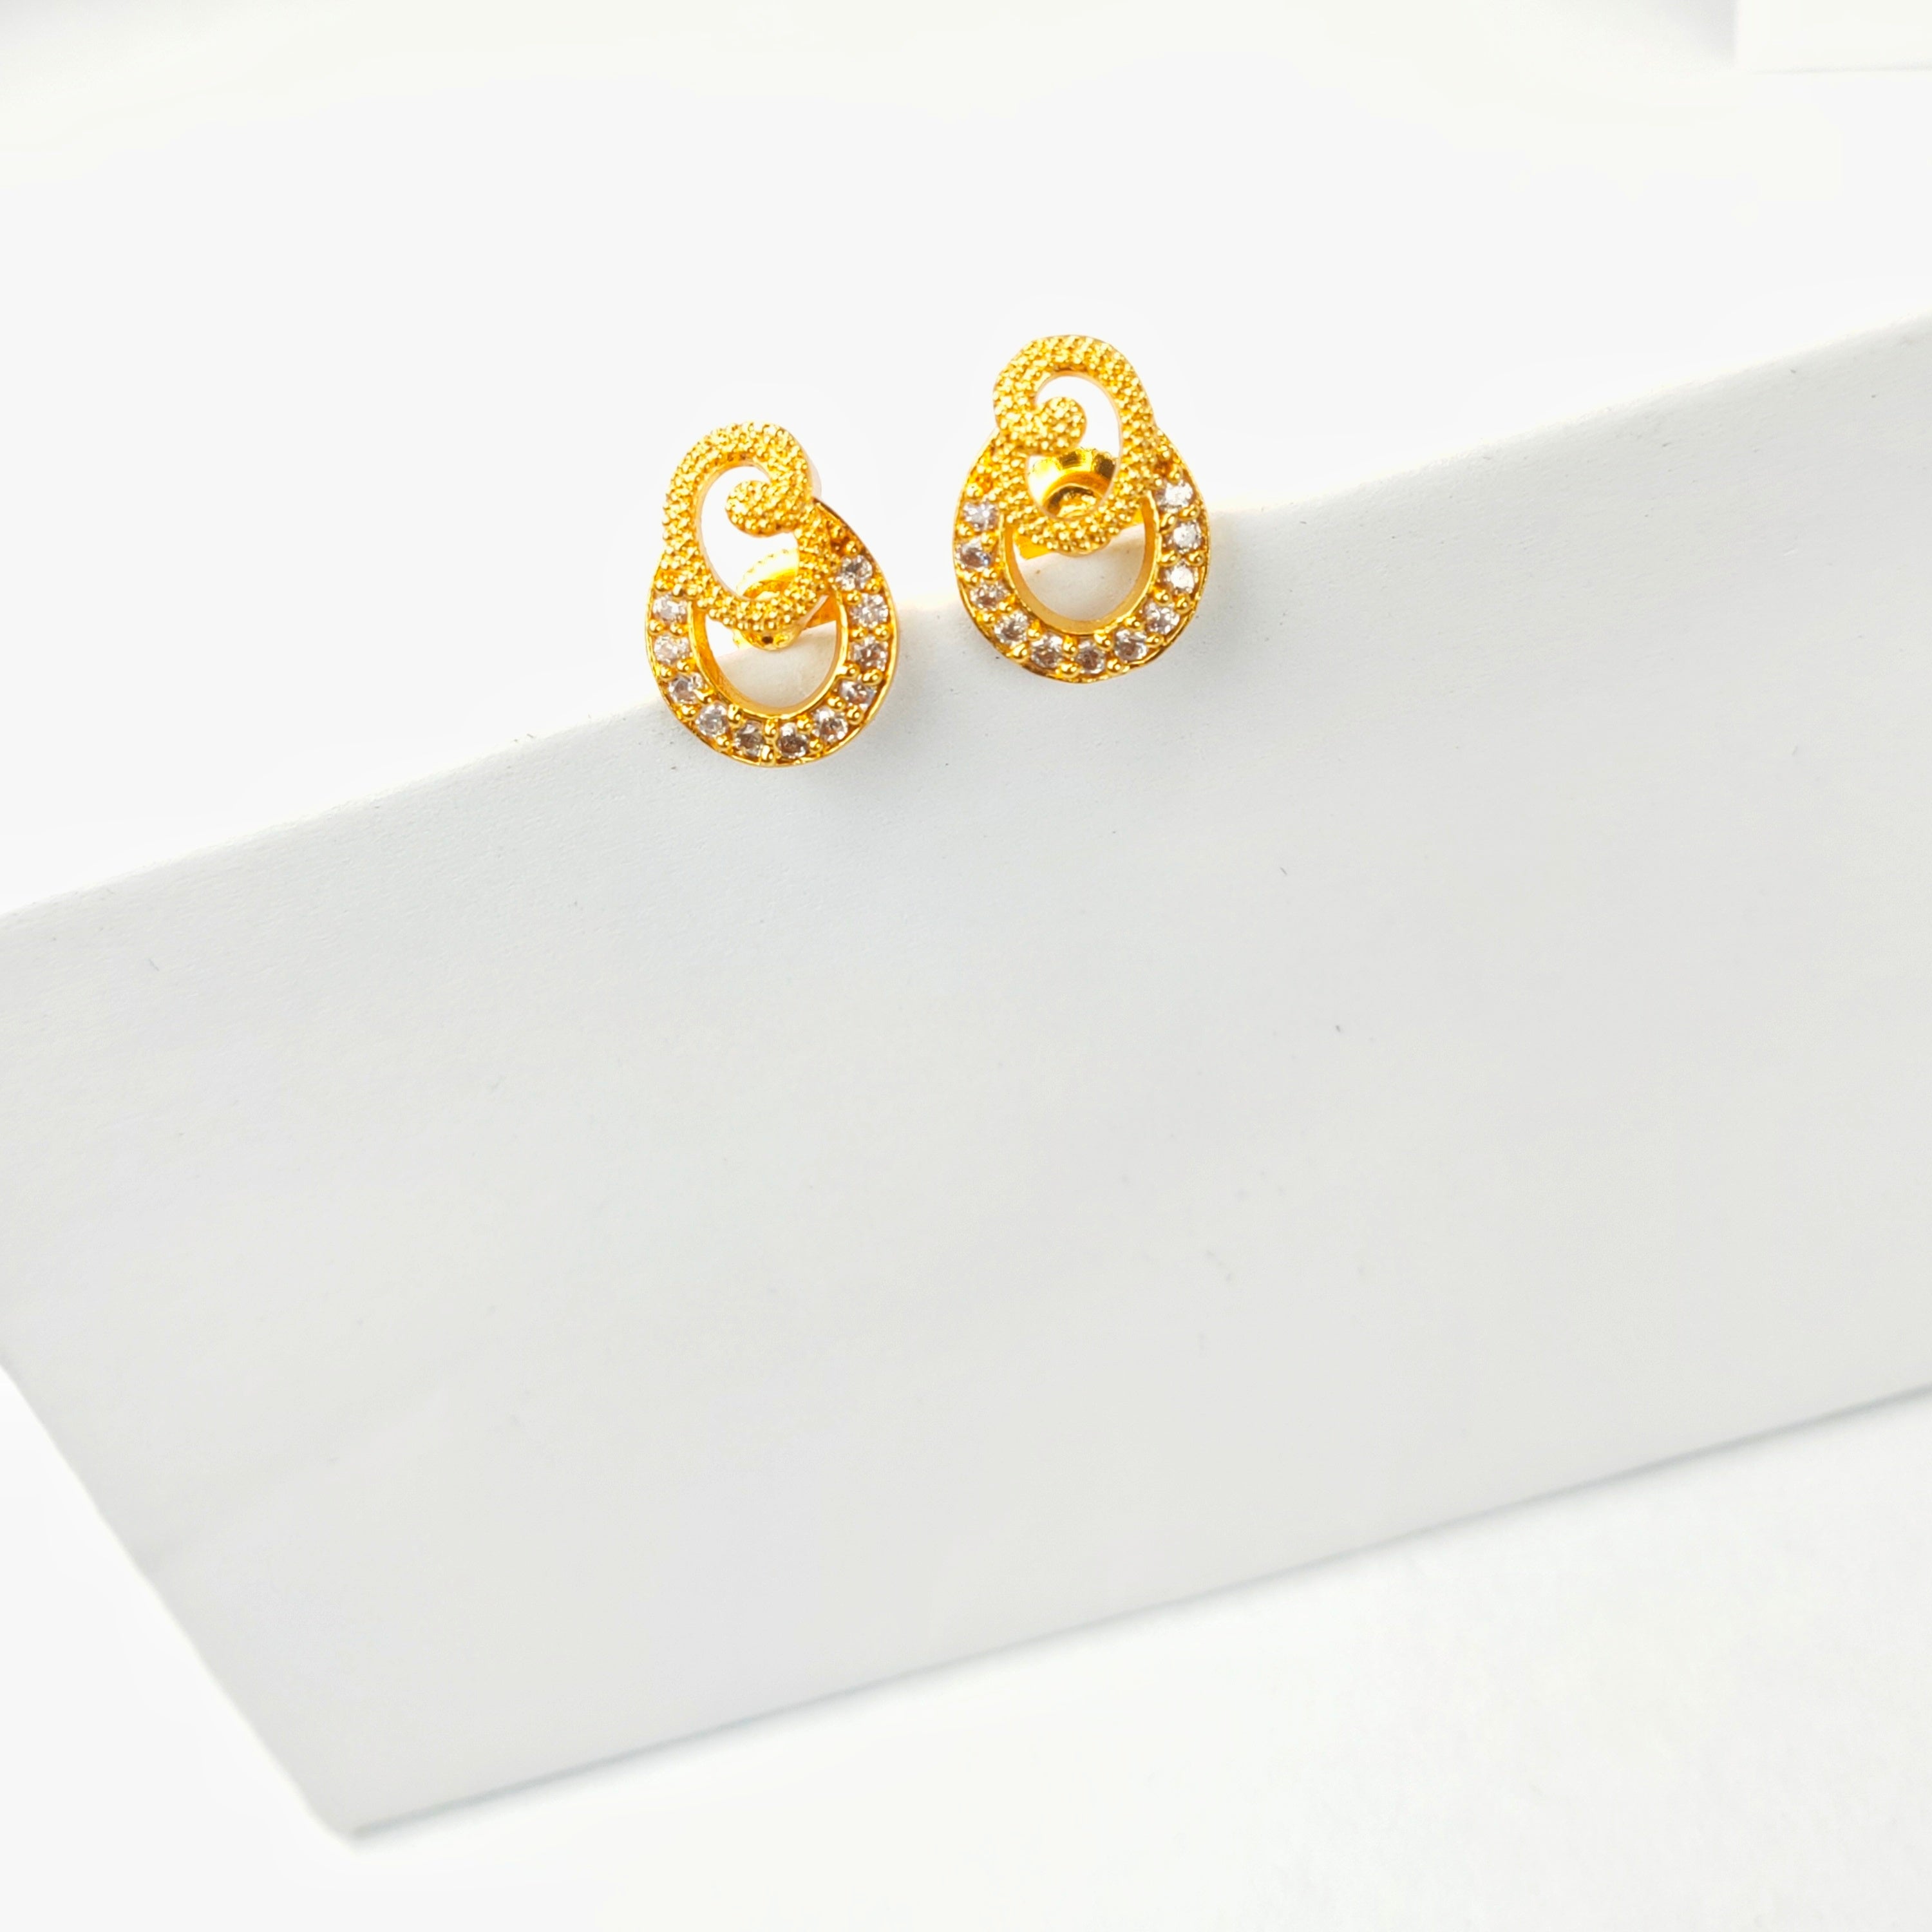 Daily use gold earring design for girls  5000to 10000 gold small  studs earring  YouTube